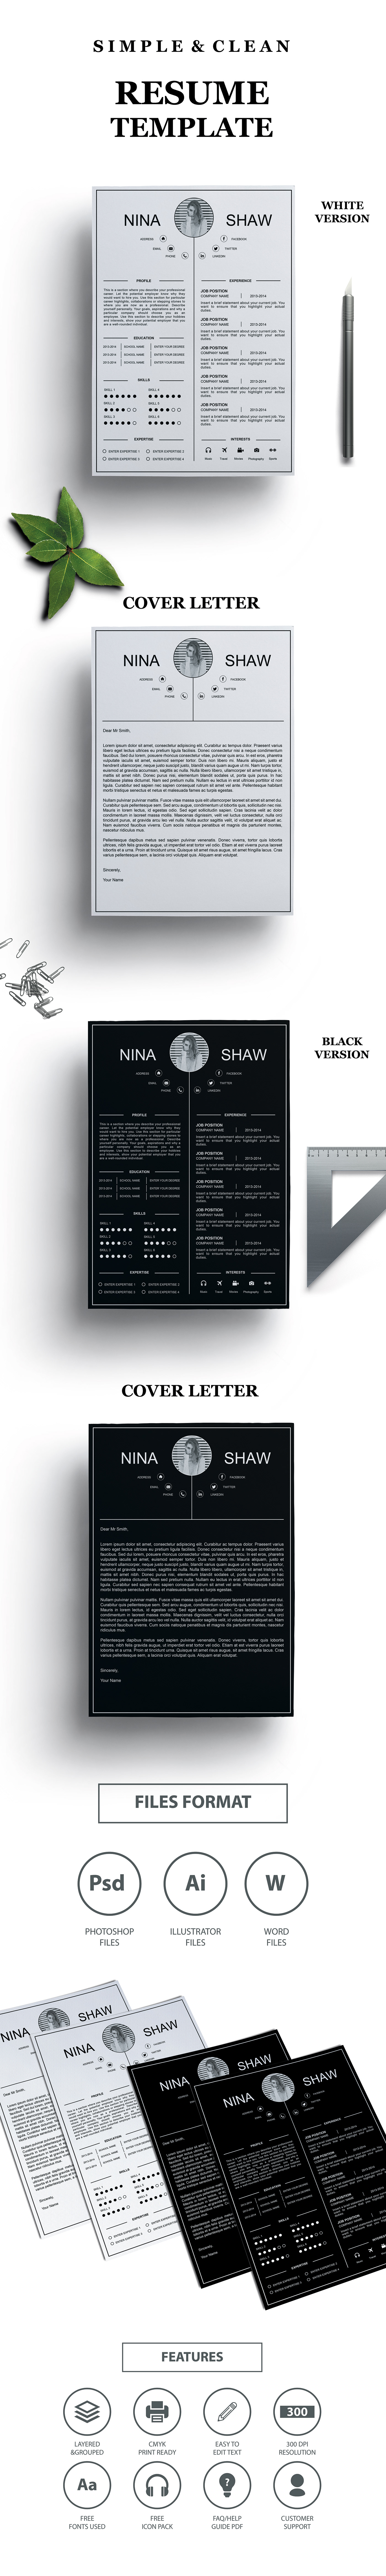 Resume cover letter design modern sophiticated simple clean photoshop Illustrator